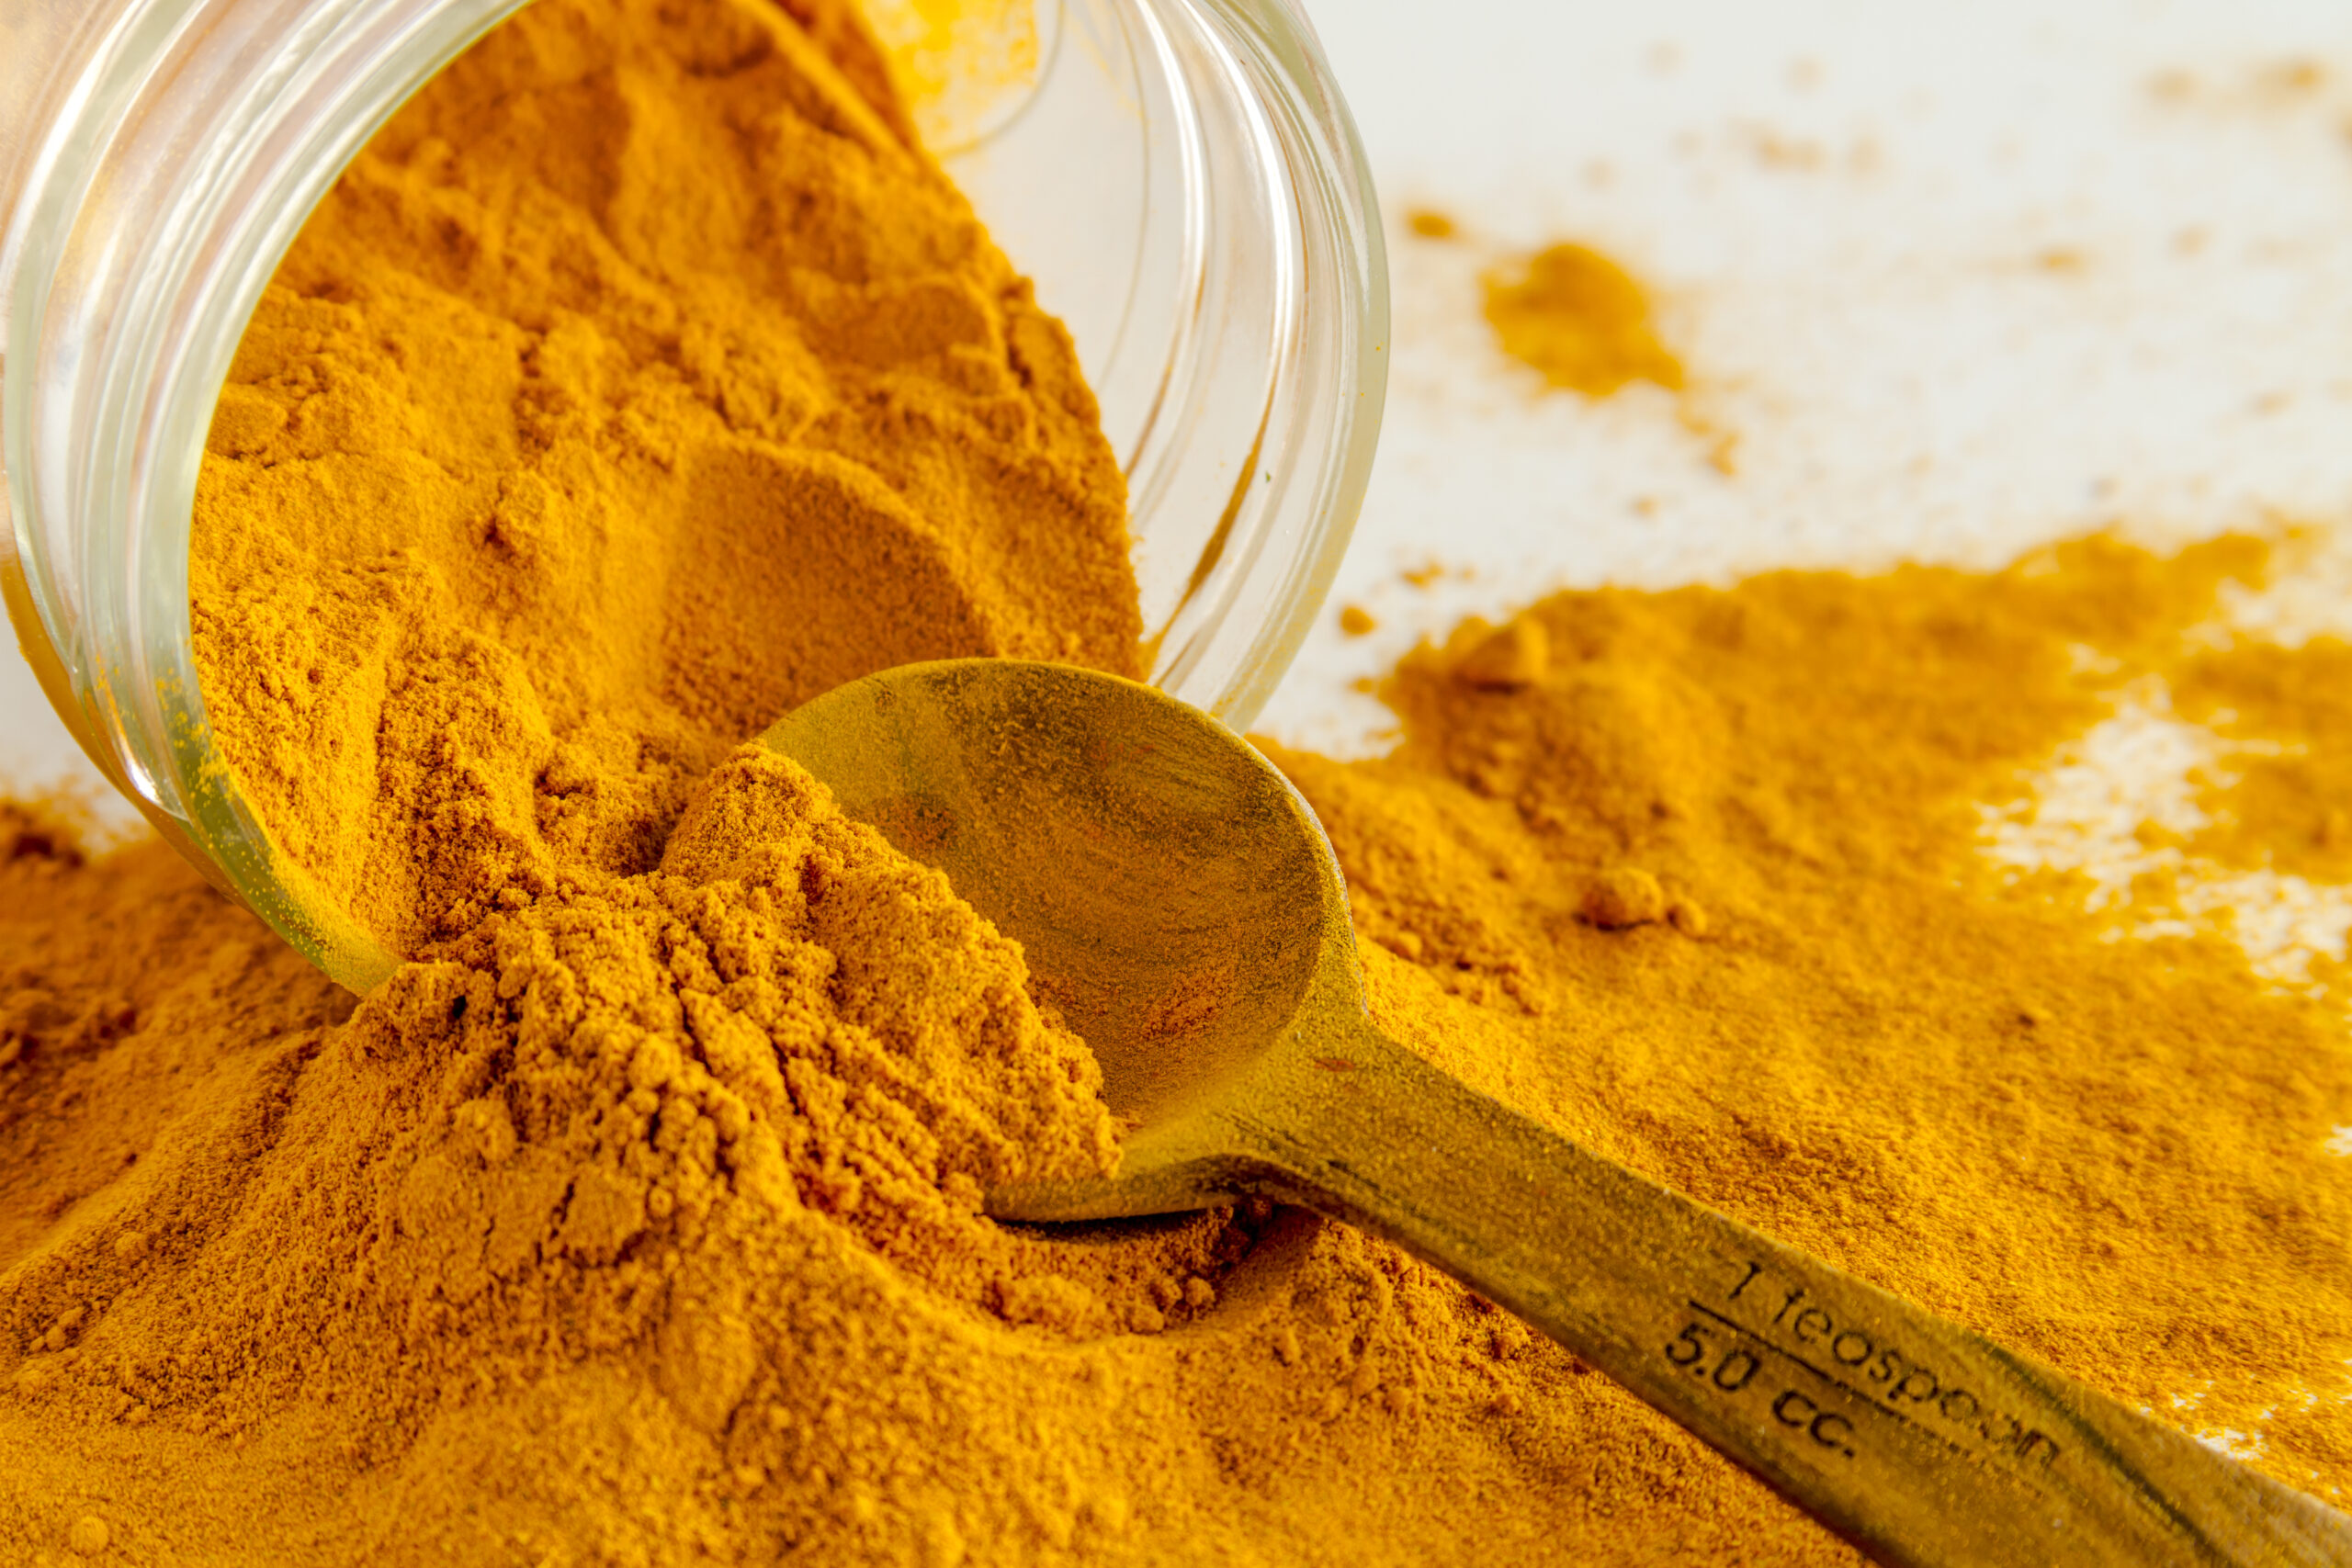 Close up of organic turmeric (curcuma) powder spilling out of glass jar with measuring spoon on white background